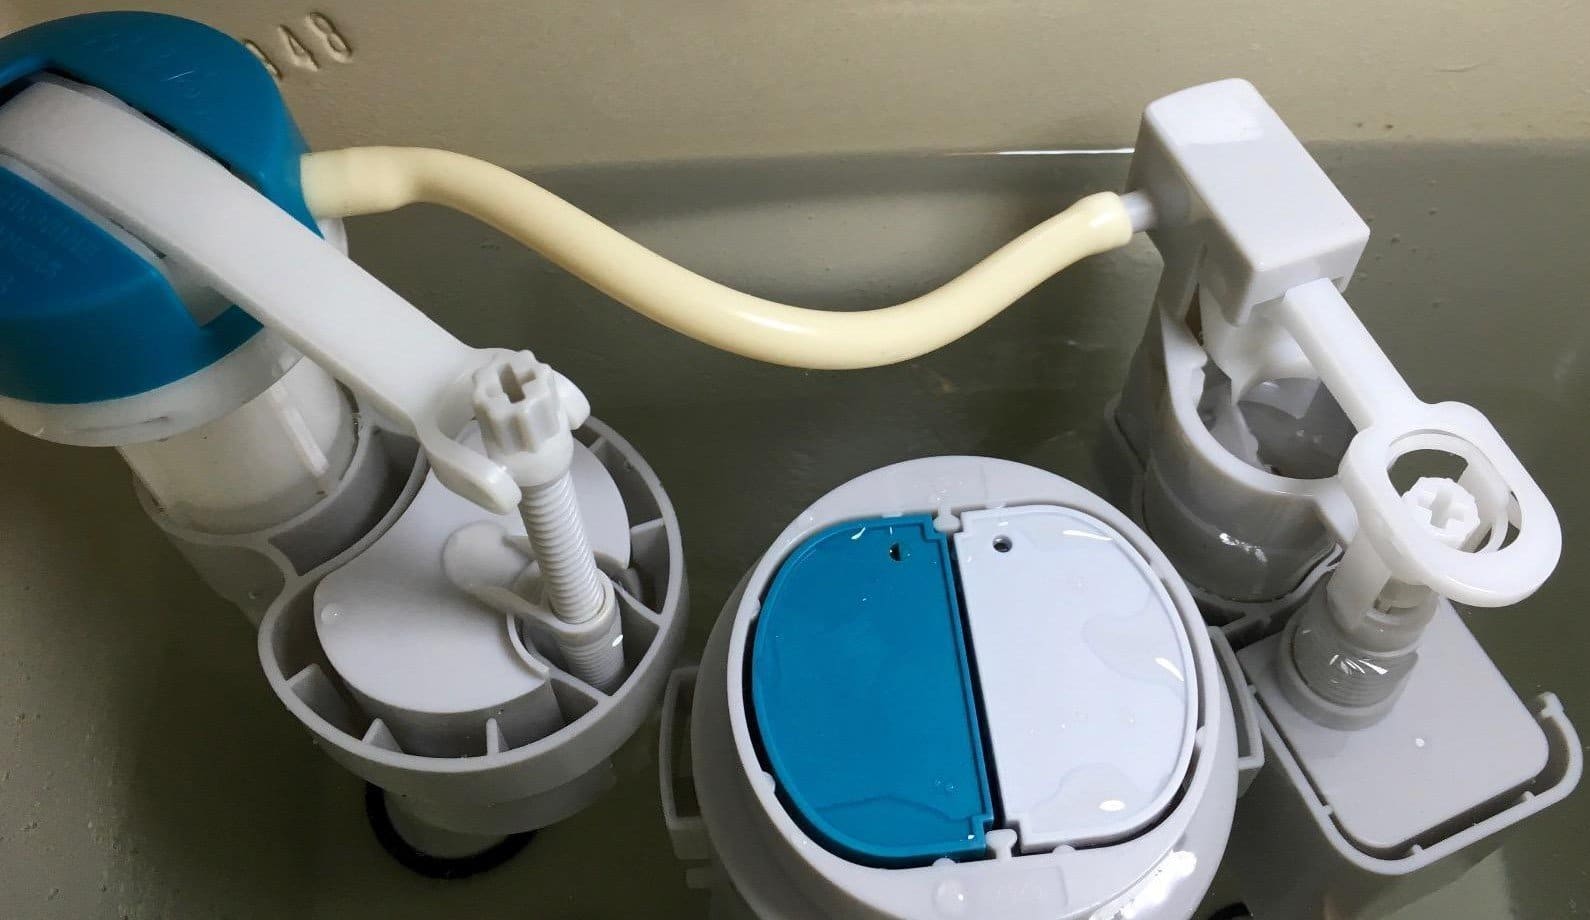 Toilet Leaks When Flushed? Here is how to Fix it Fast - Toilet Haven